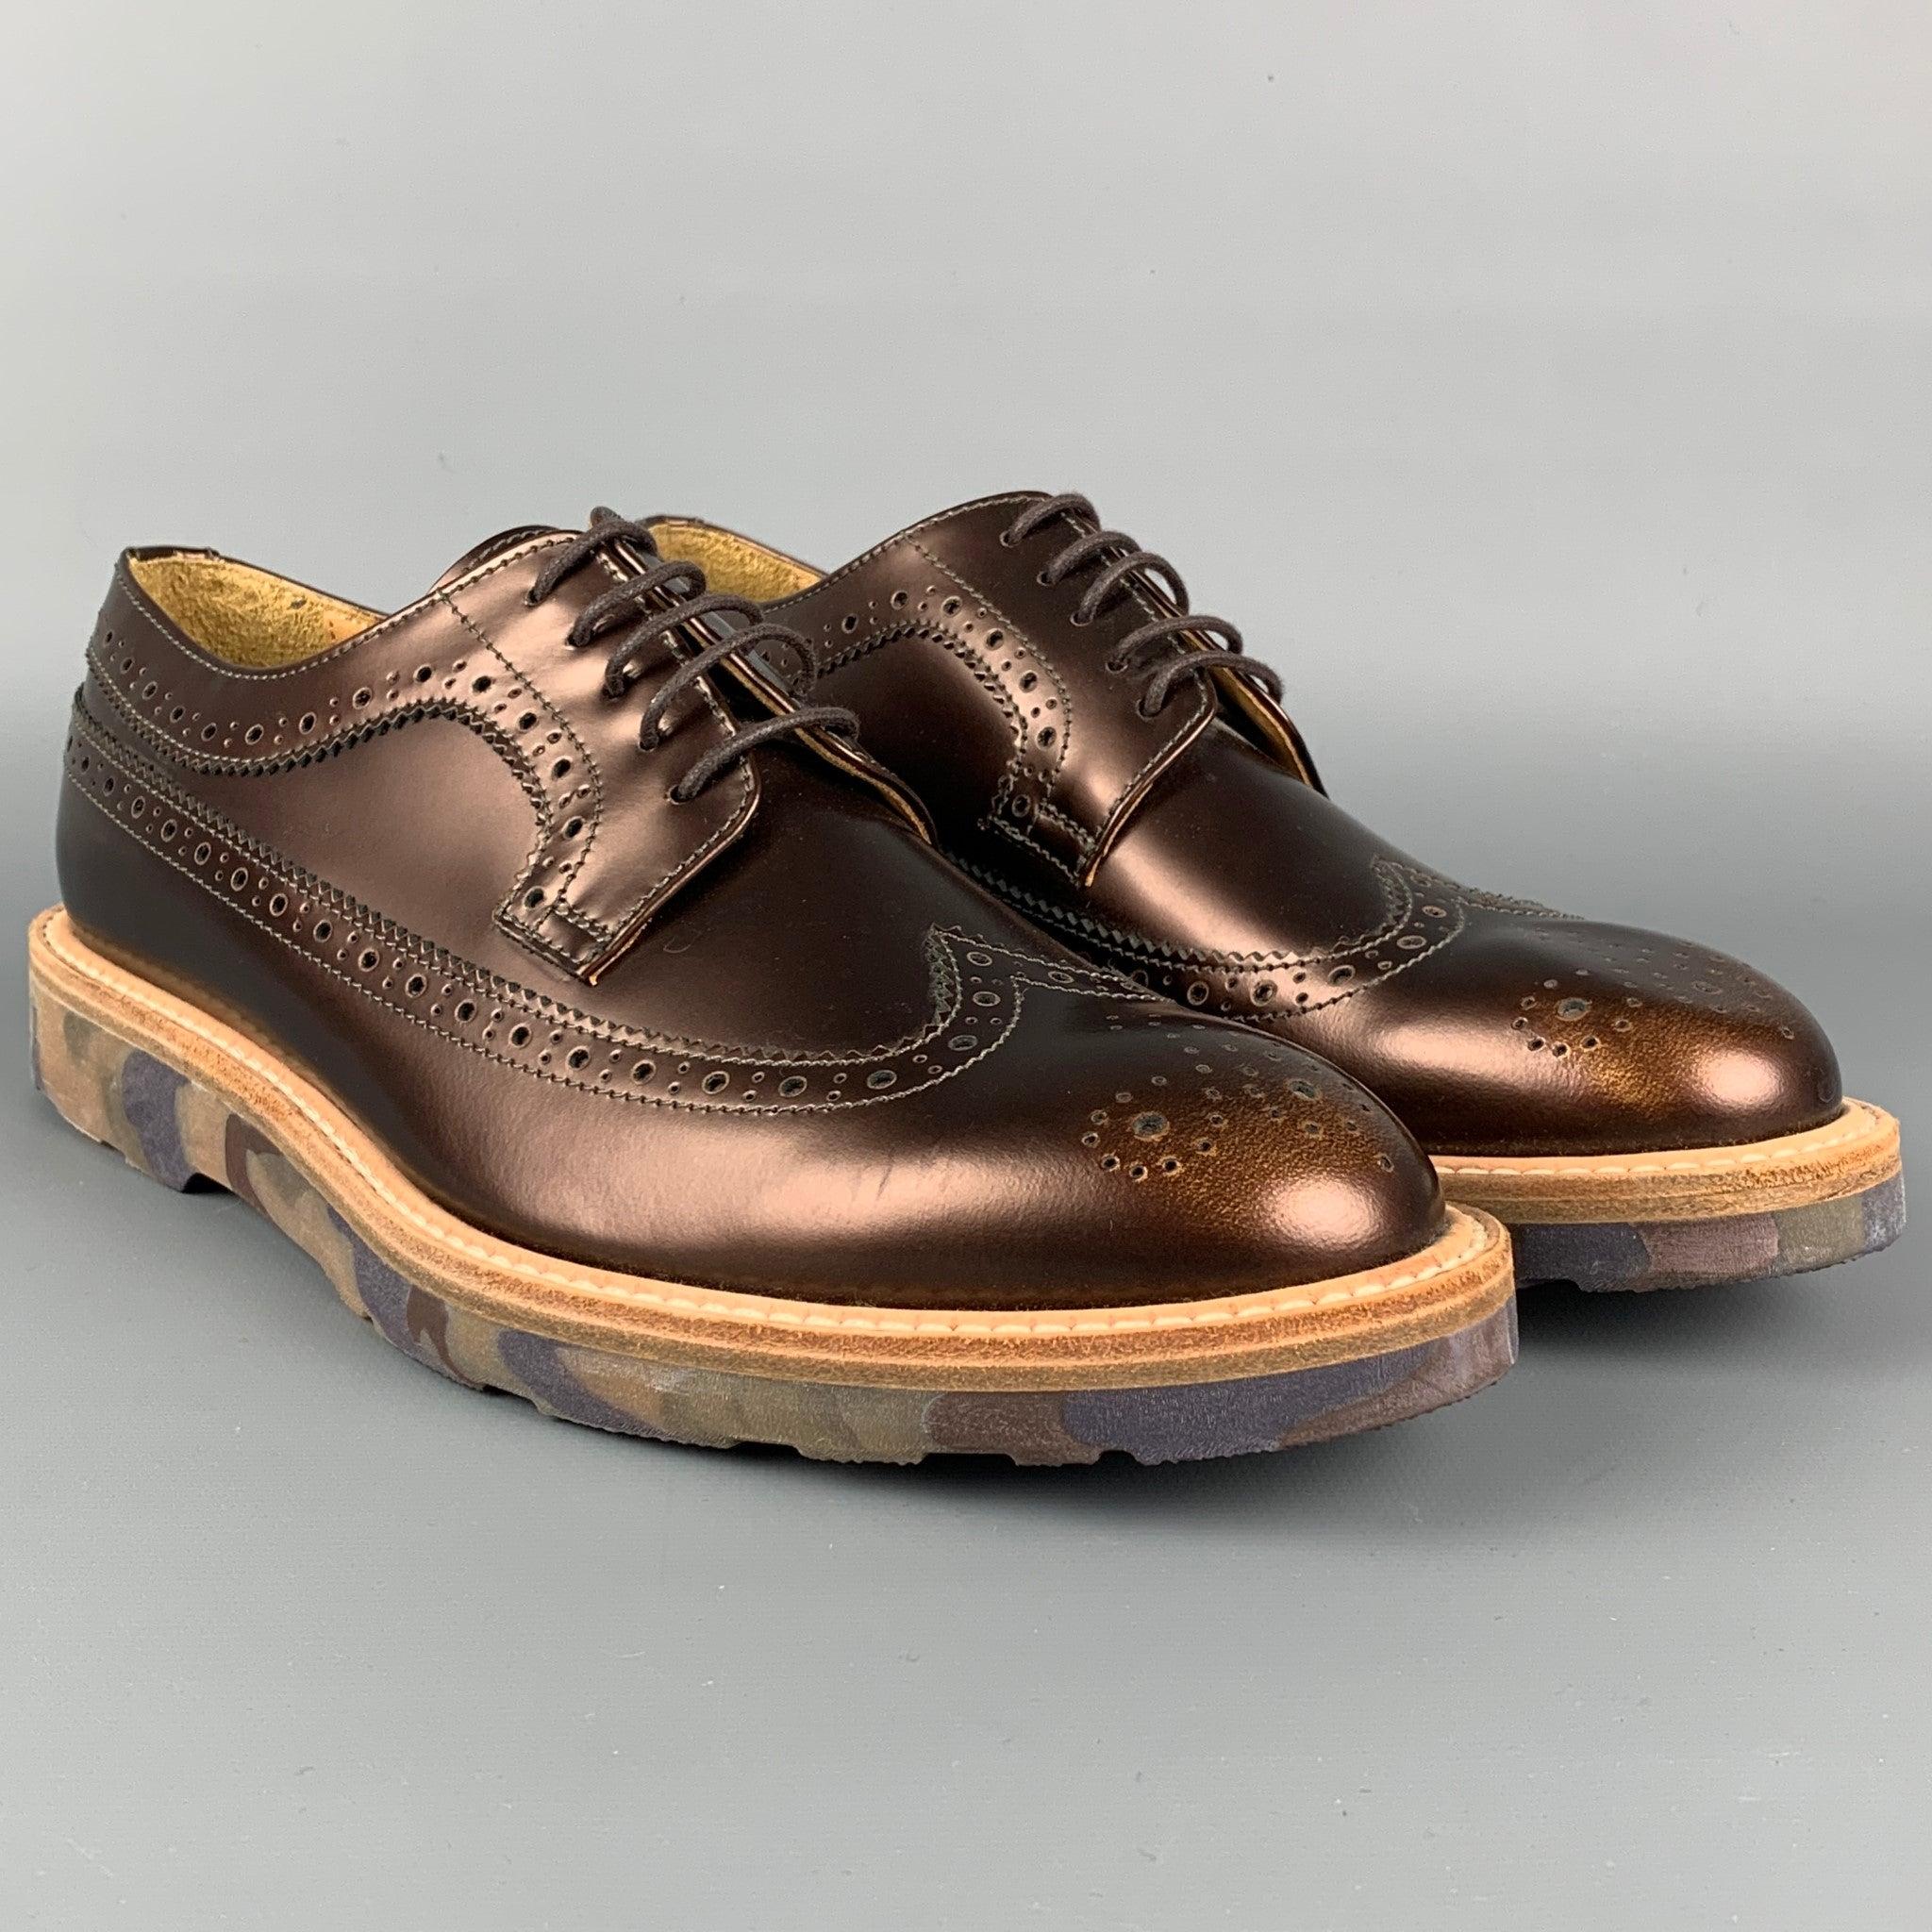 PAUL SMITH 'Men Only' shoes comes in a copper leather featuring a wingtip style, rubber sole, and a lace up closure. Made in Italy.
Excellent
Pre-Owned Condition. 

Marked:   L050 37.5Outsole: 10.5 inches  x 4 inches 
  
  
 
Reference: